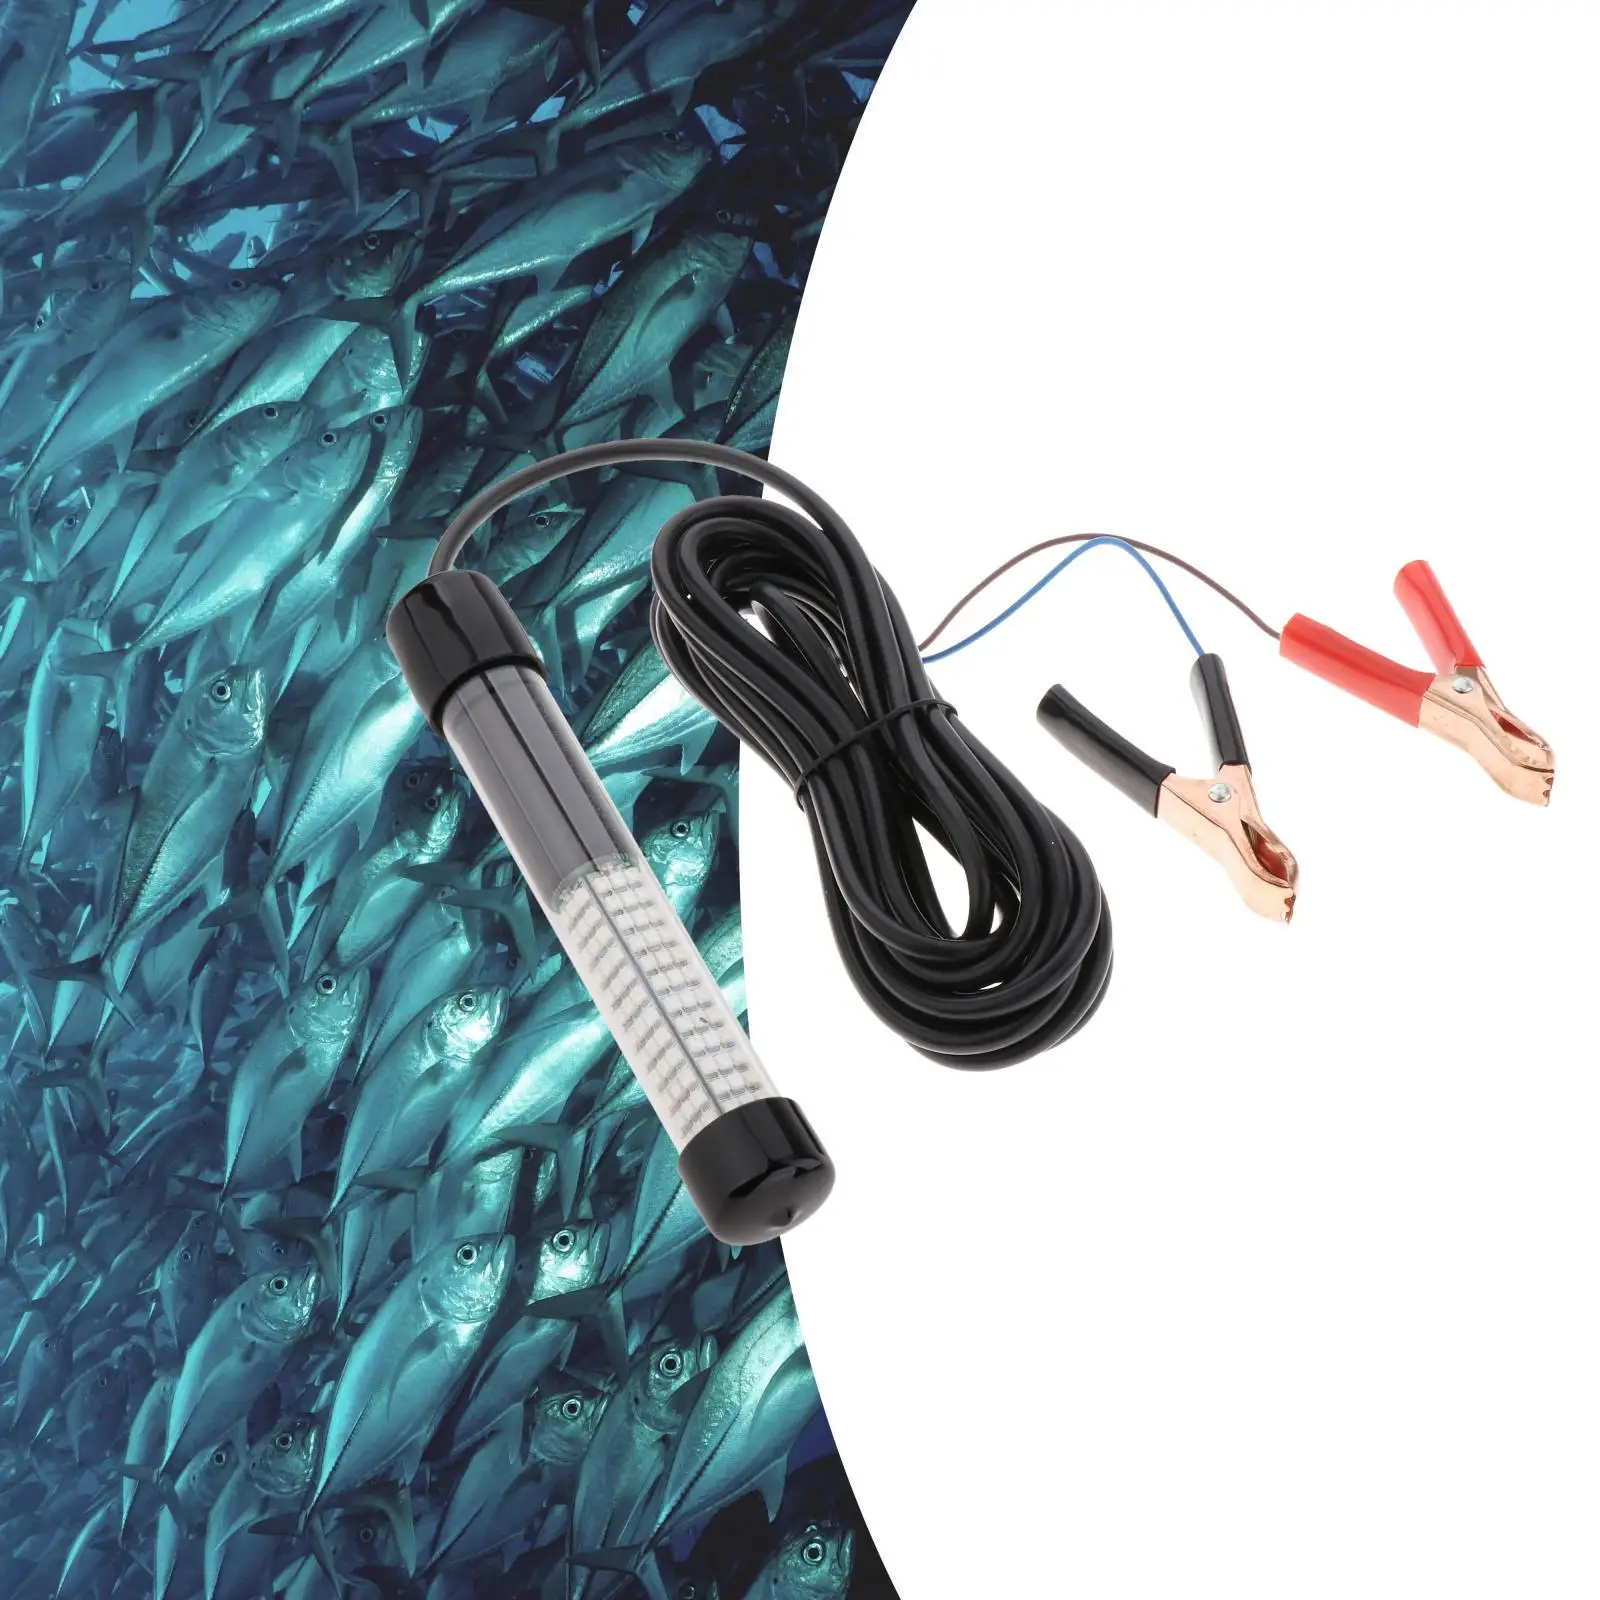 LED Submersible Fishing Light 5M Cord Portable Super Bright Waterproof Outdoor Night Fishing Finder for Saltwater Sea Fishing